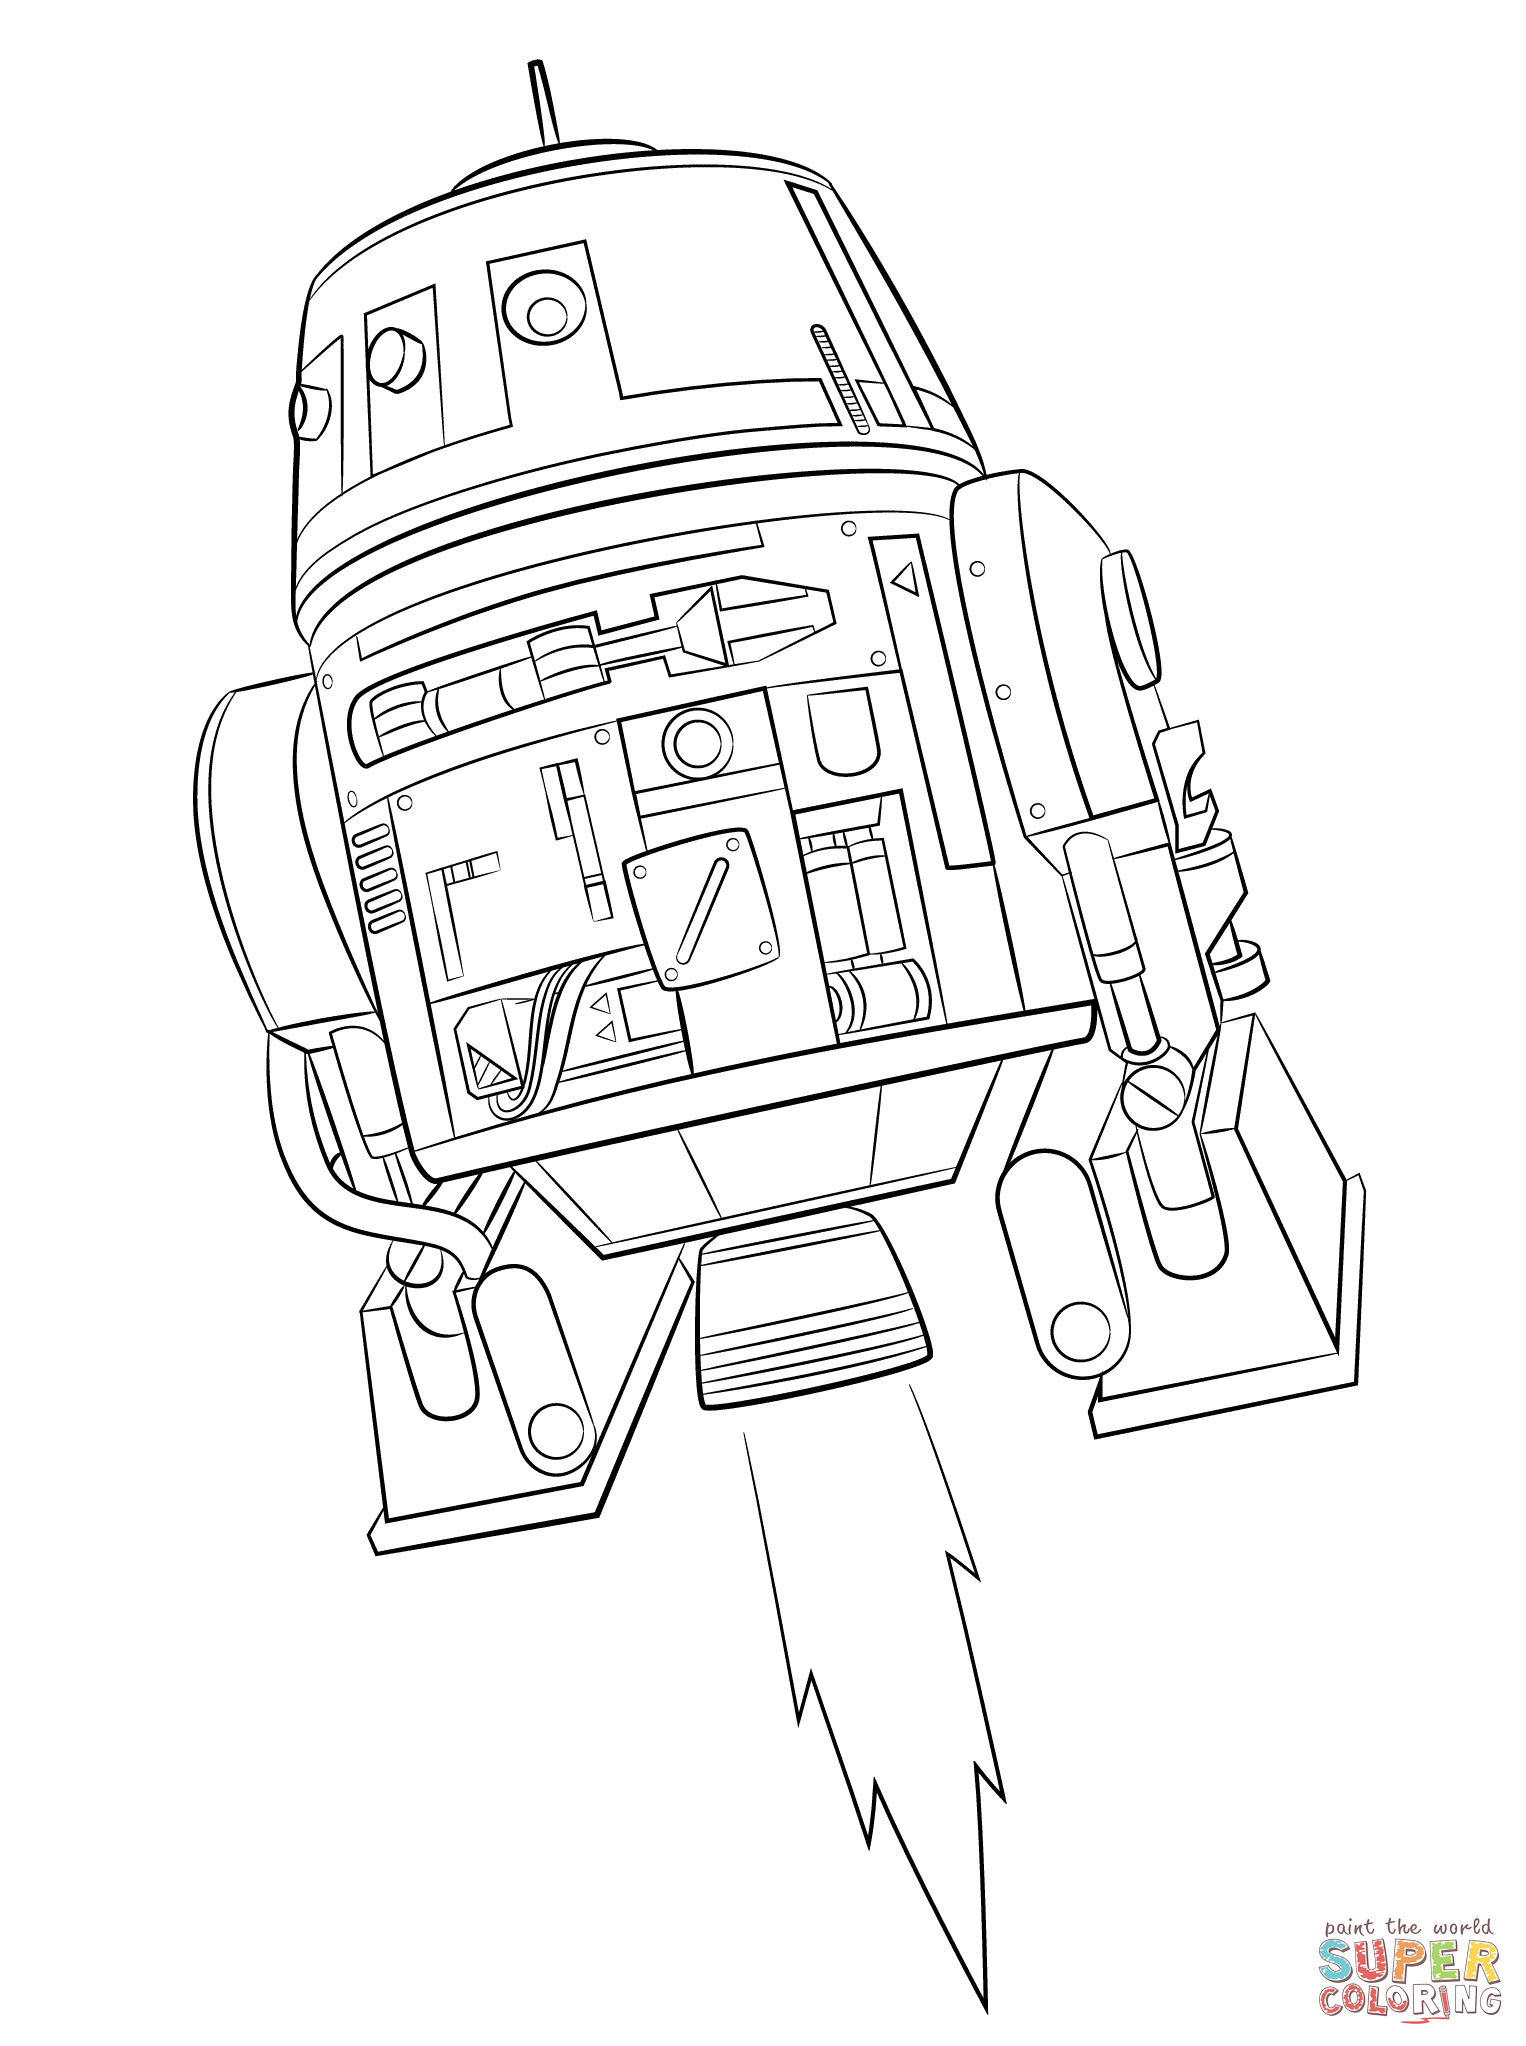 Coloring Pages Star Wars Rebels Coloring Page Star Wars 1526x2046px 27281 Star Wars C